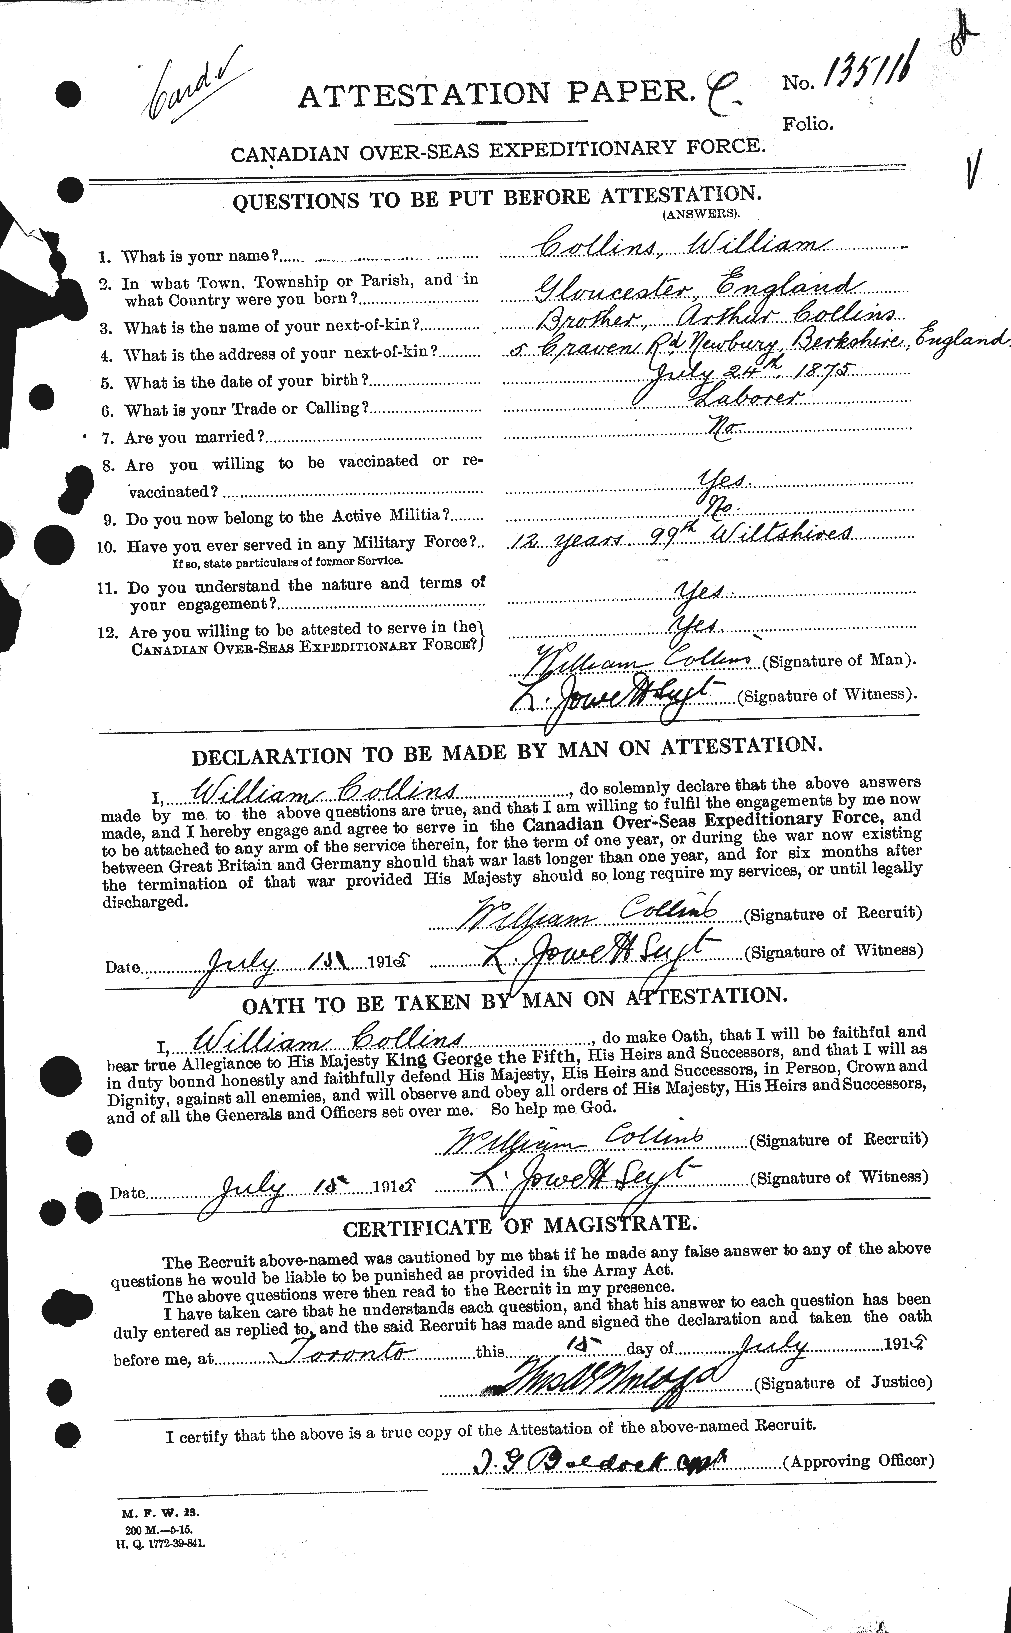 Personnel Records of the First World War - CEF 068819a